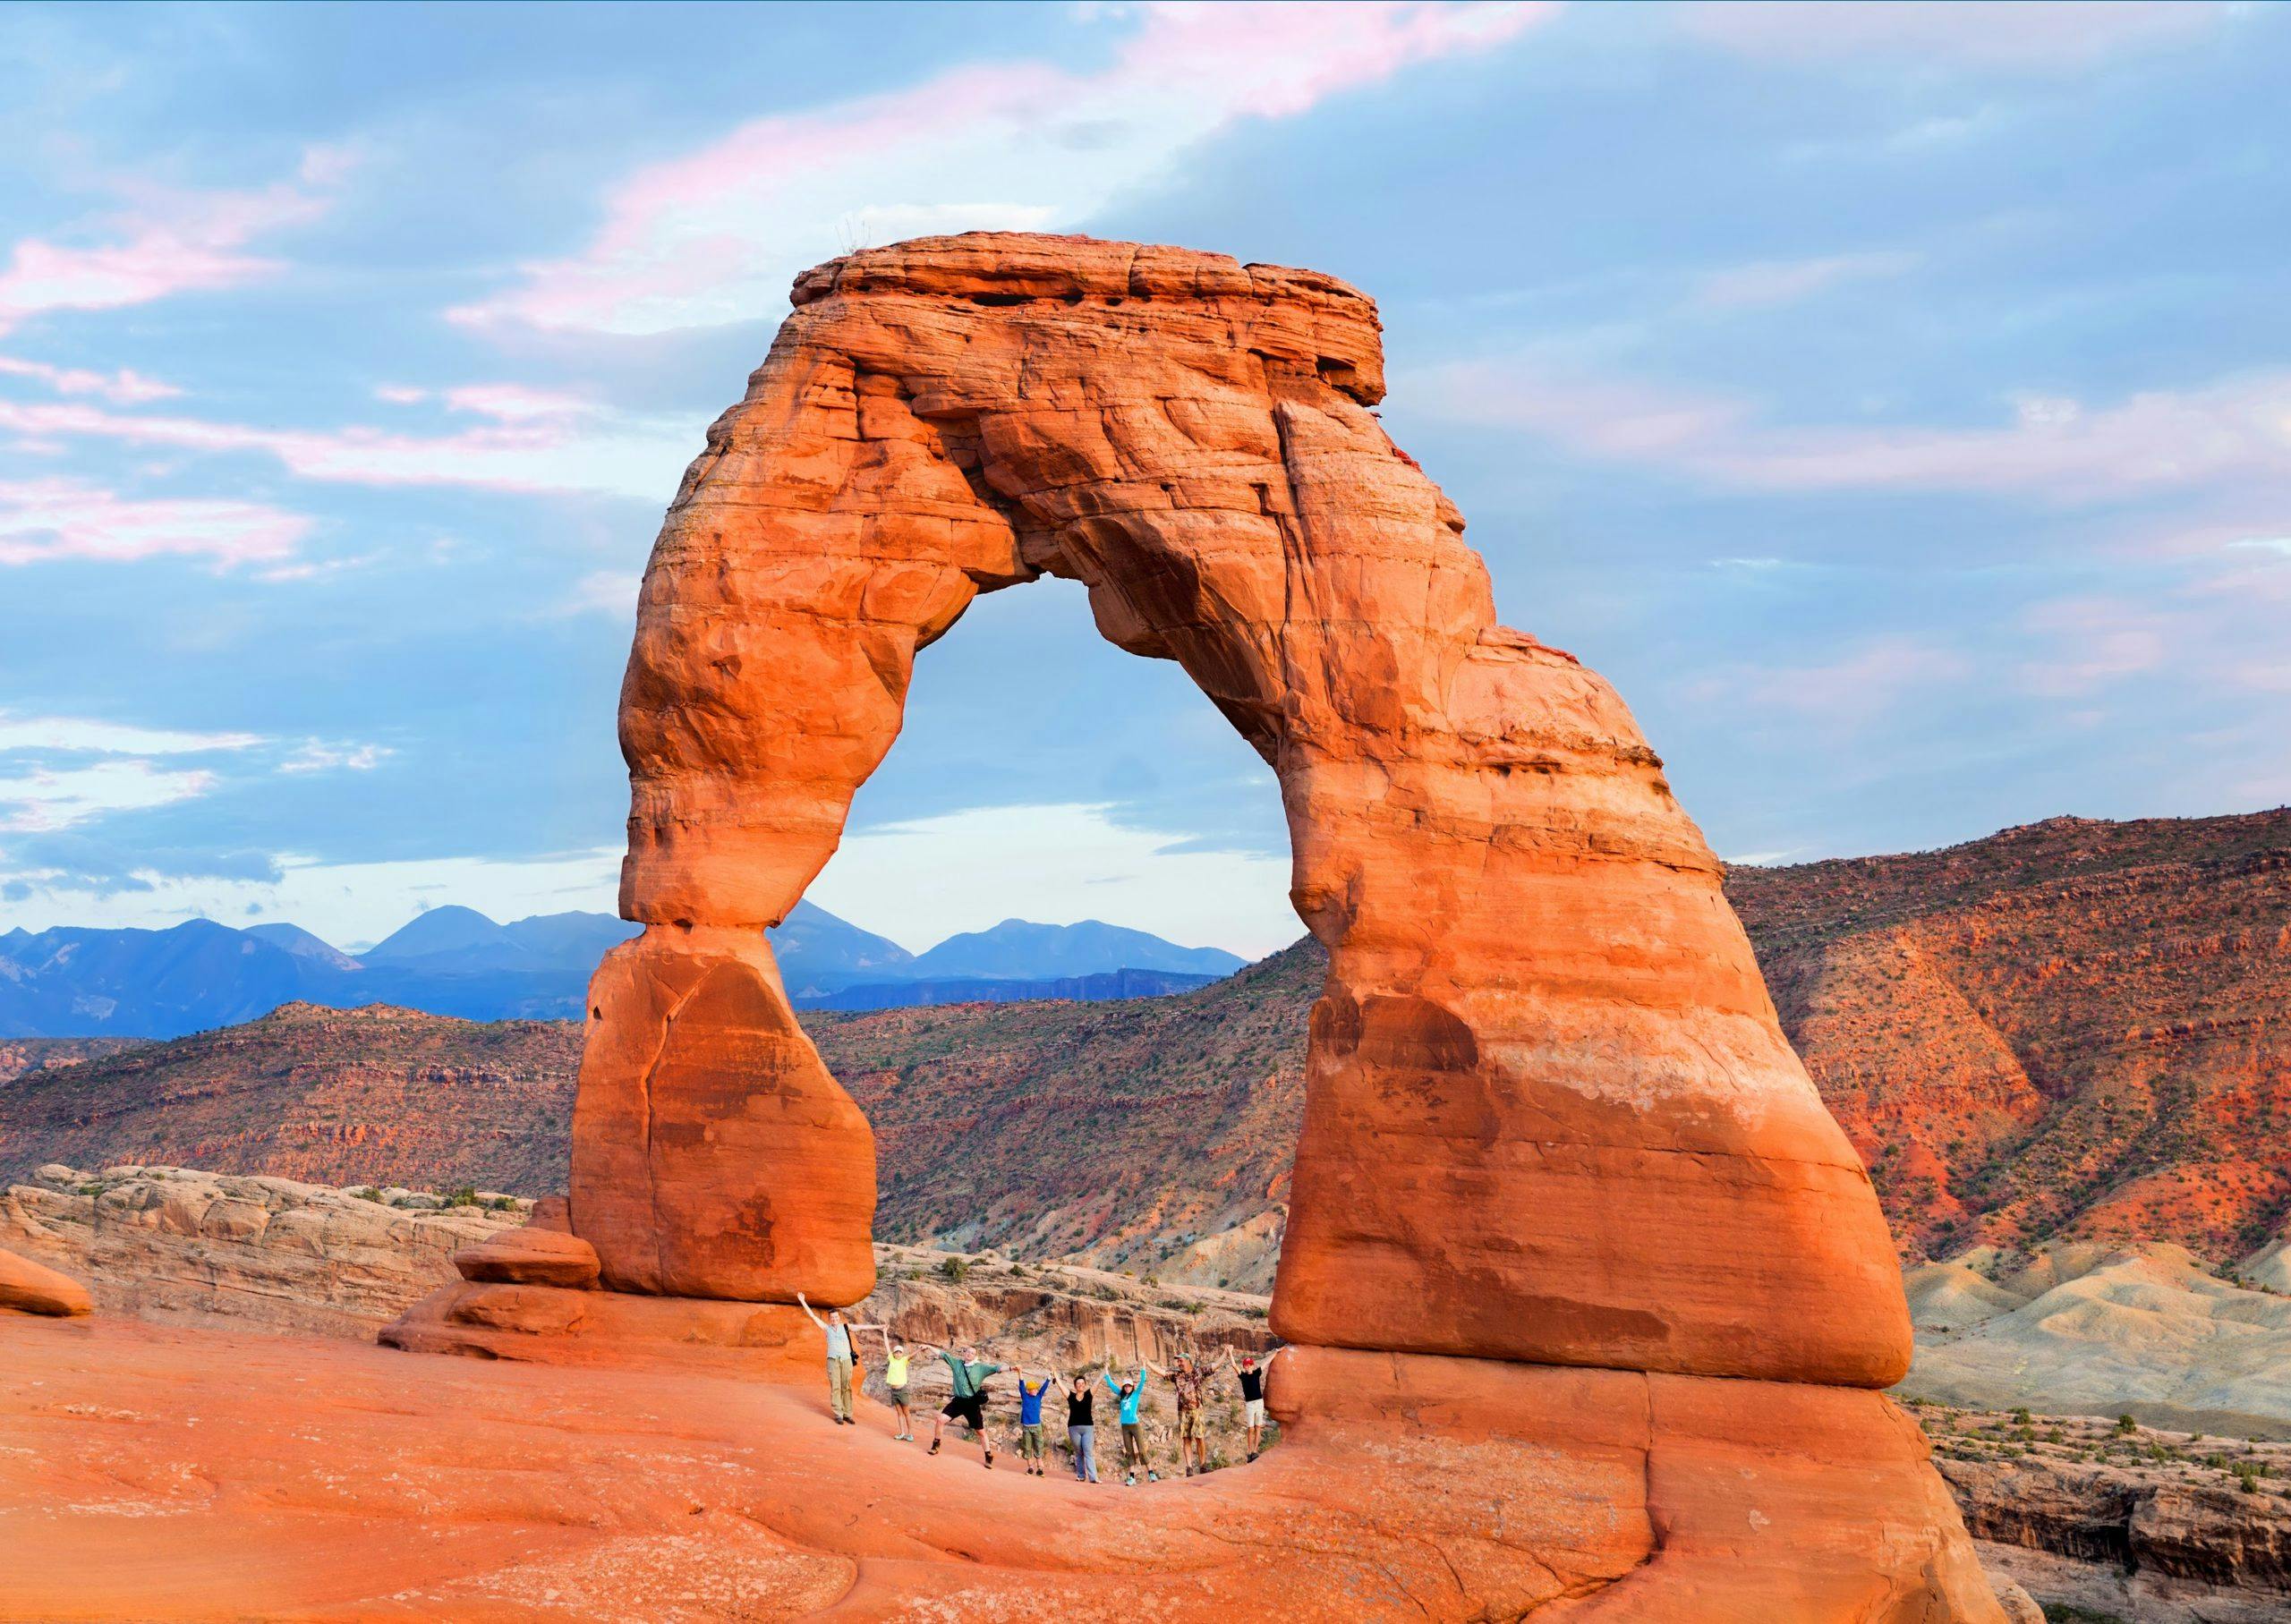 A group of people (two families with children) joined hands and raised them. Arches National Park, Utah.